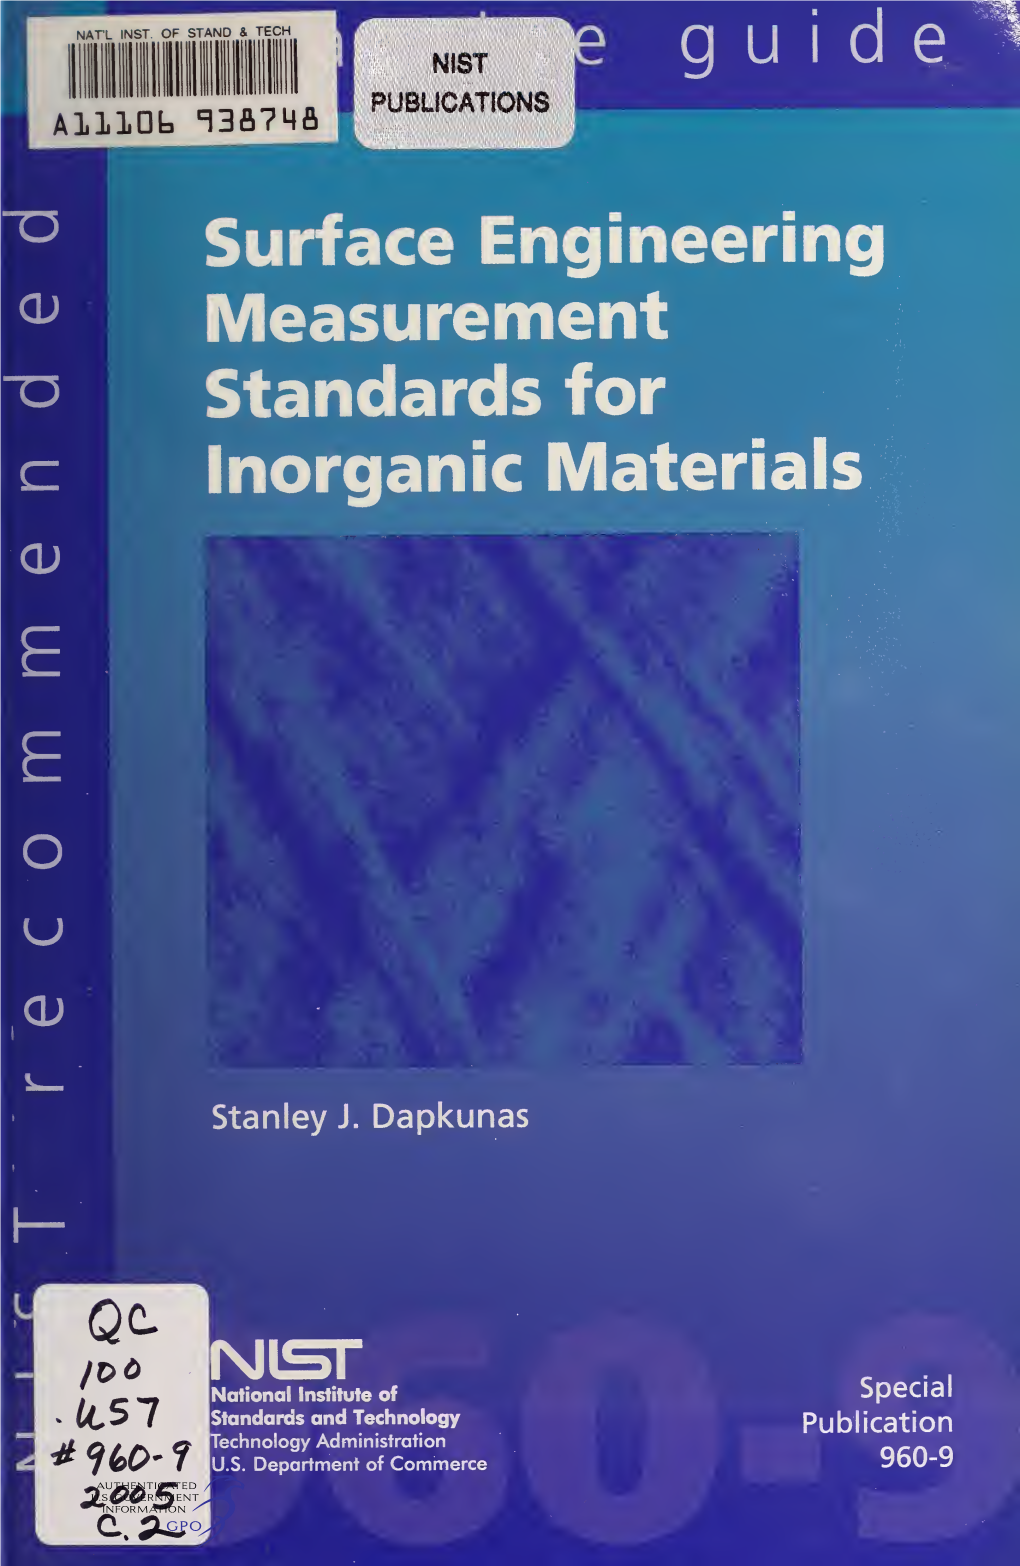 Surface Engineering Measurement for Standards for Inorganic Materials